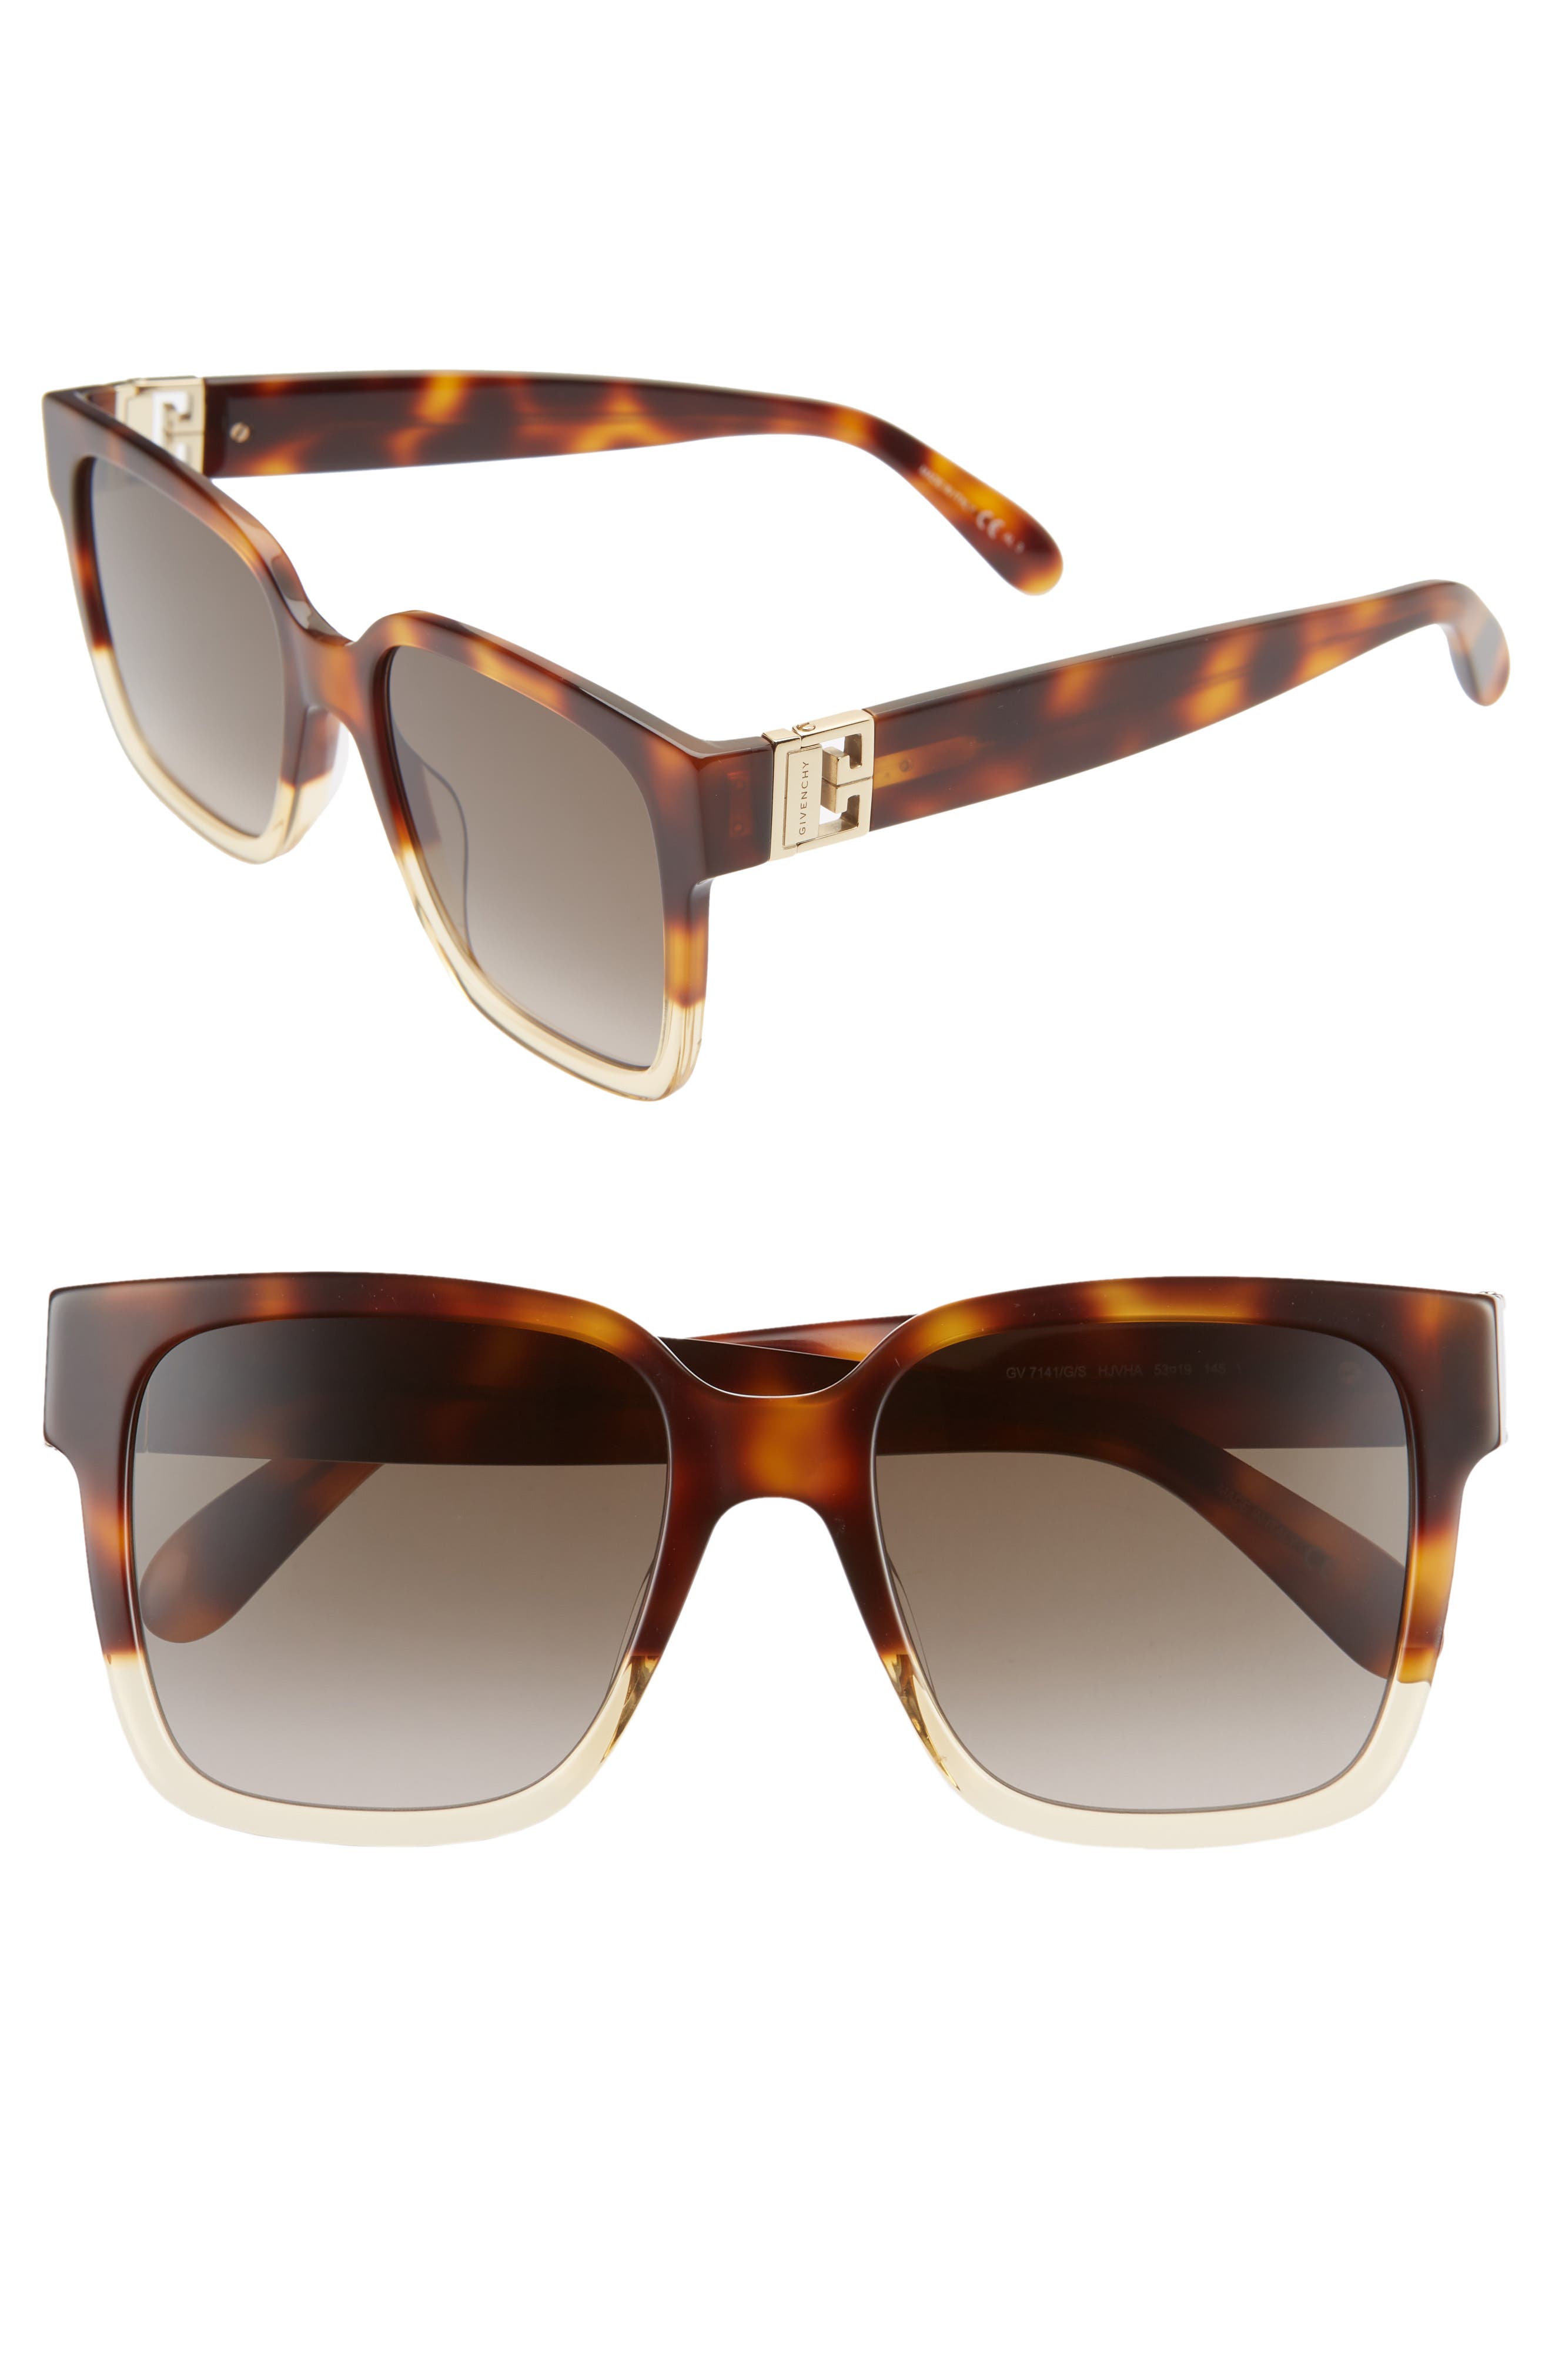 Givenchy | 53mm Square Sunglasses | Nordstrom Rack